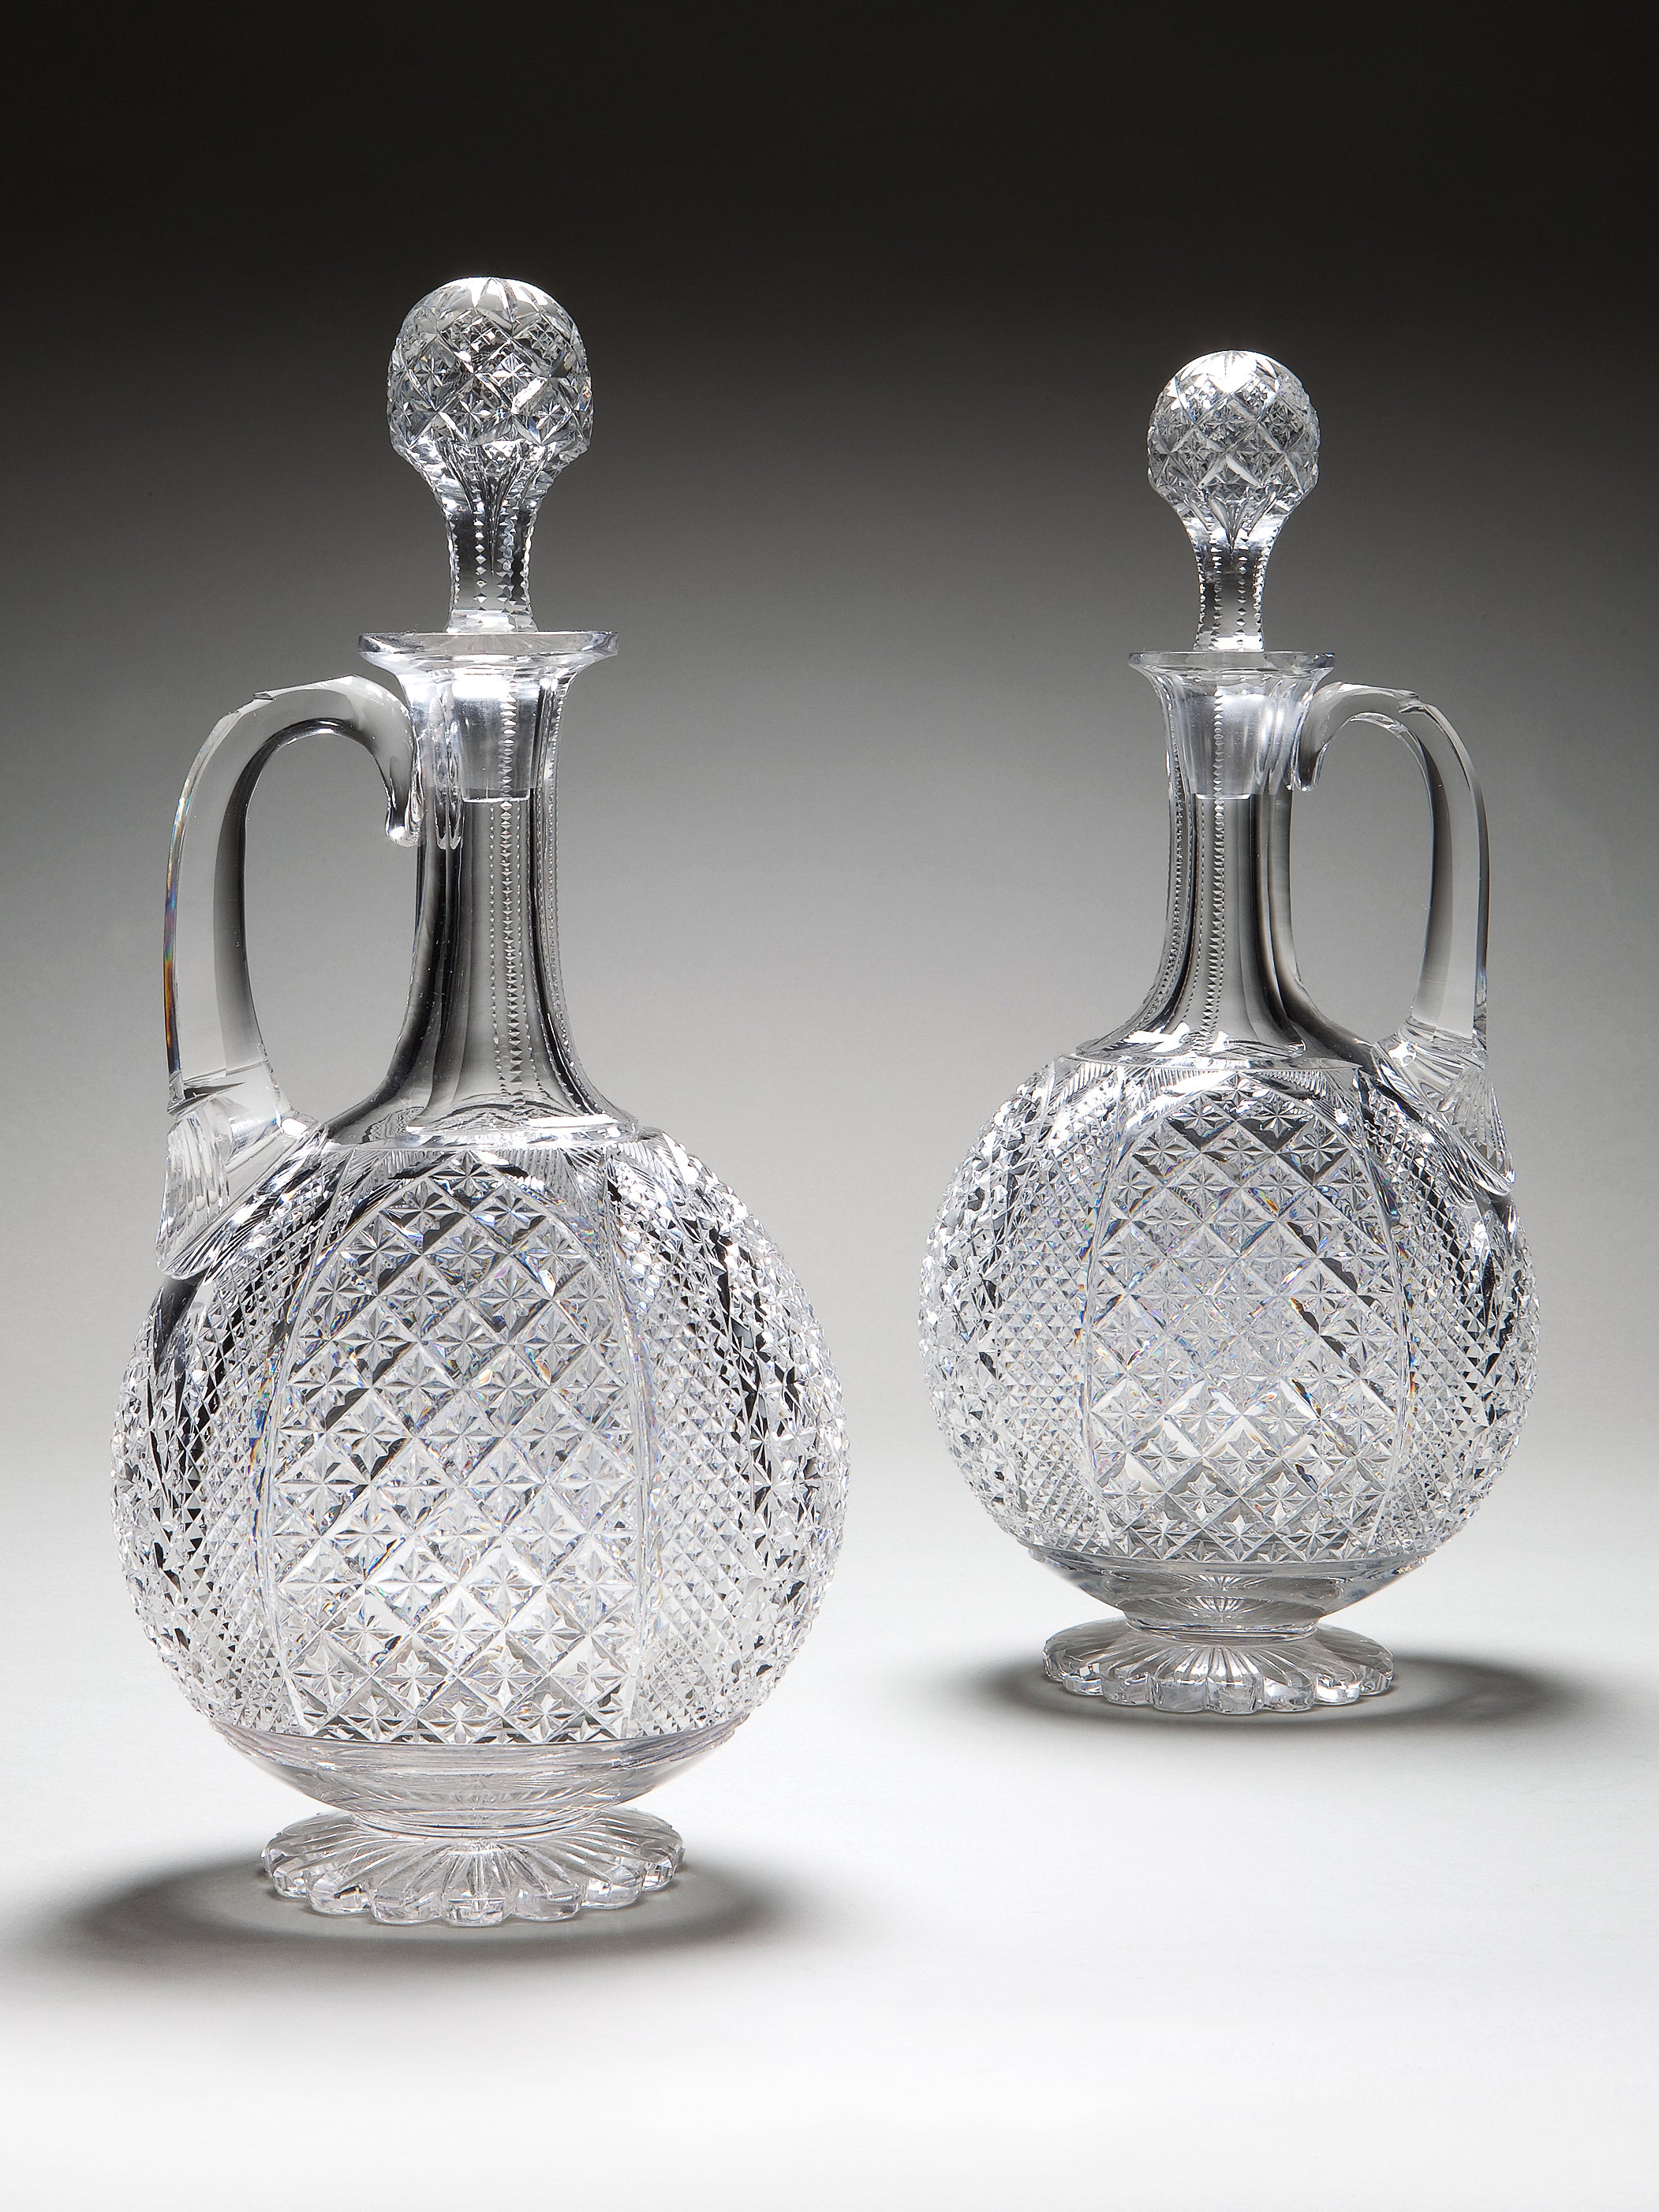 A Pair Of Cut Glass Decanters